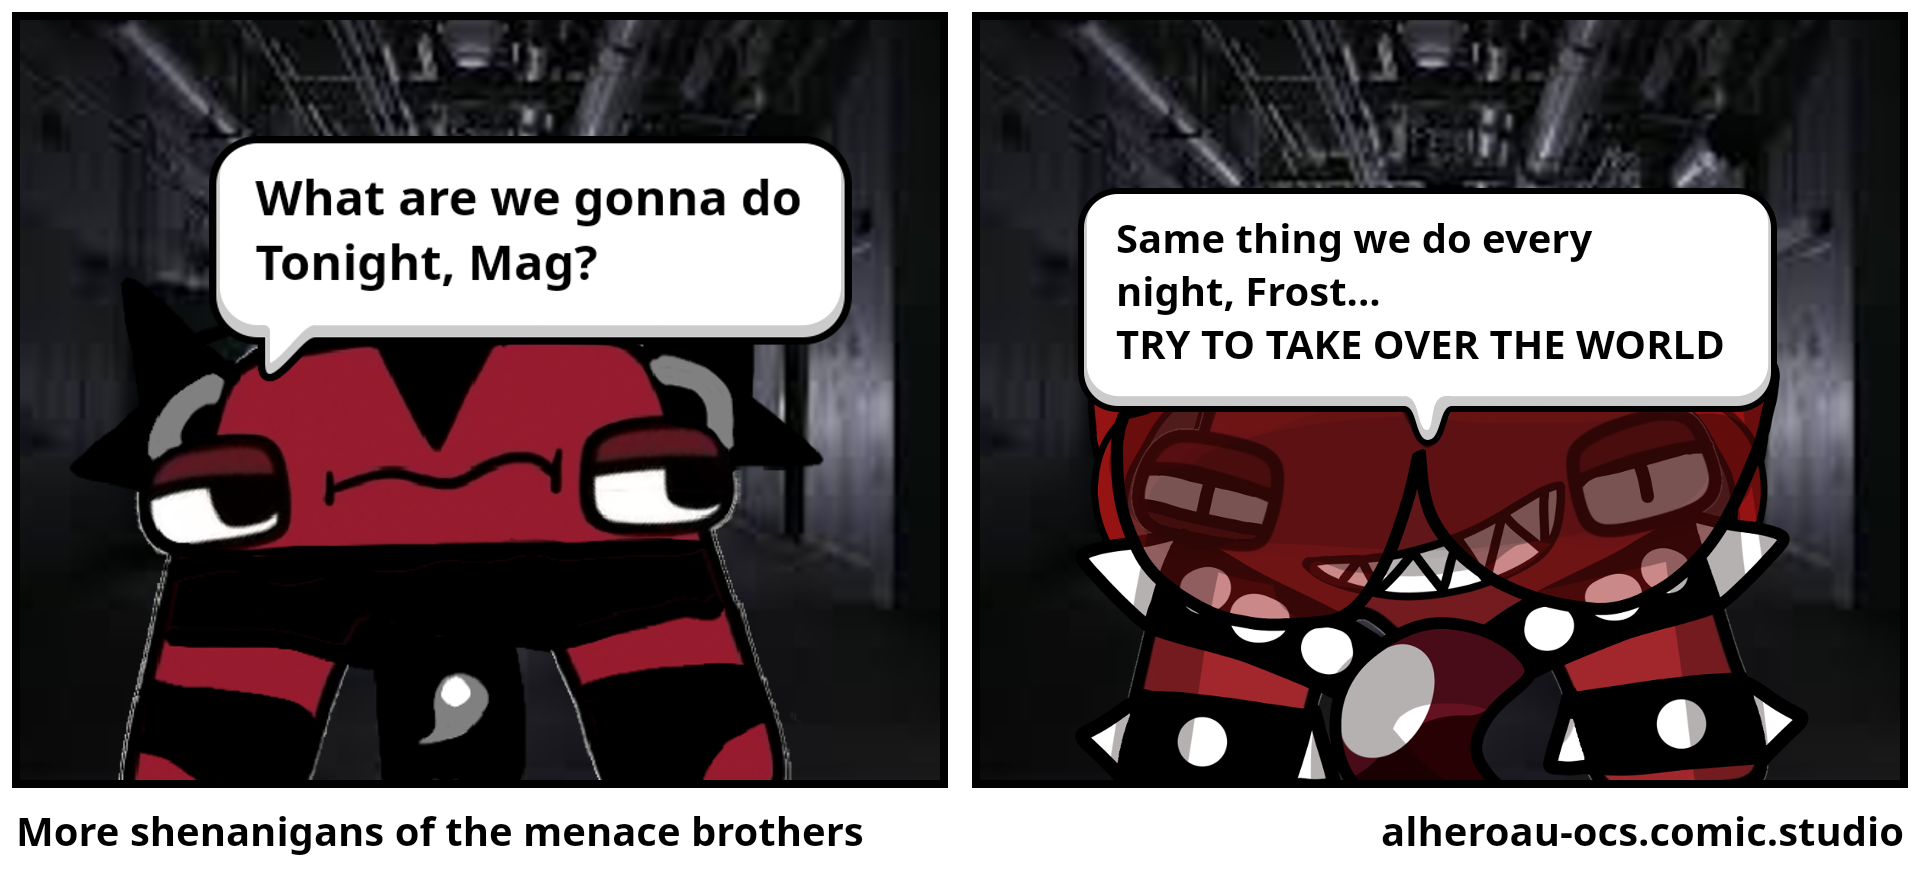 More shenanigans of the menace brothers